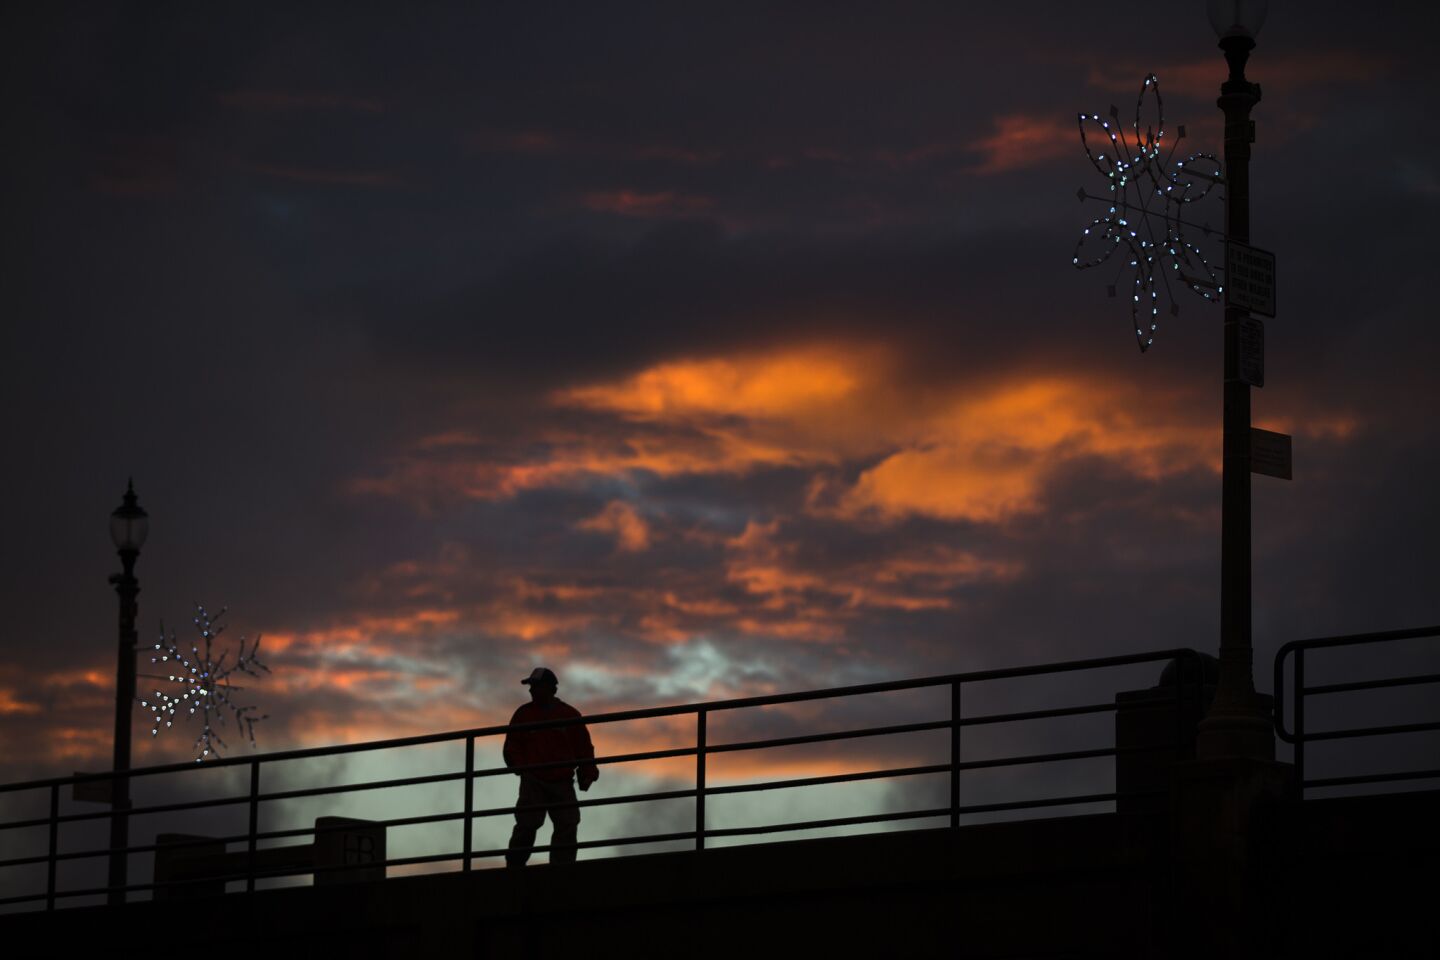 A man is silhouetted against a dramatic sky at sunset while walking on the Huntington Beach pier.